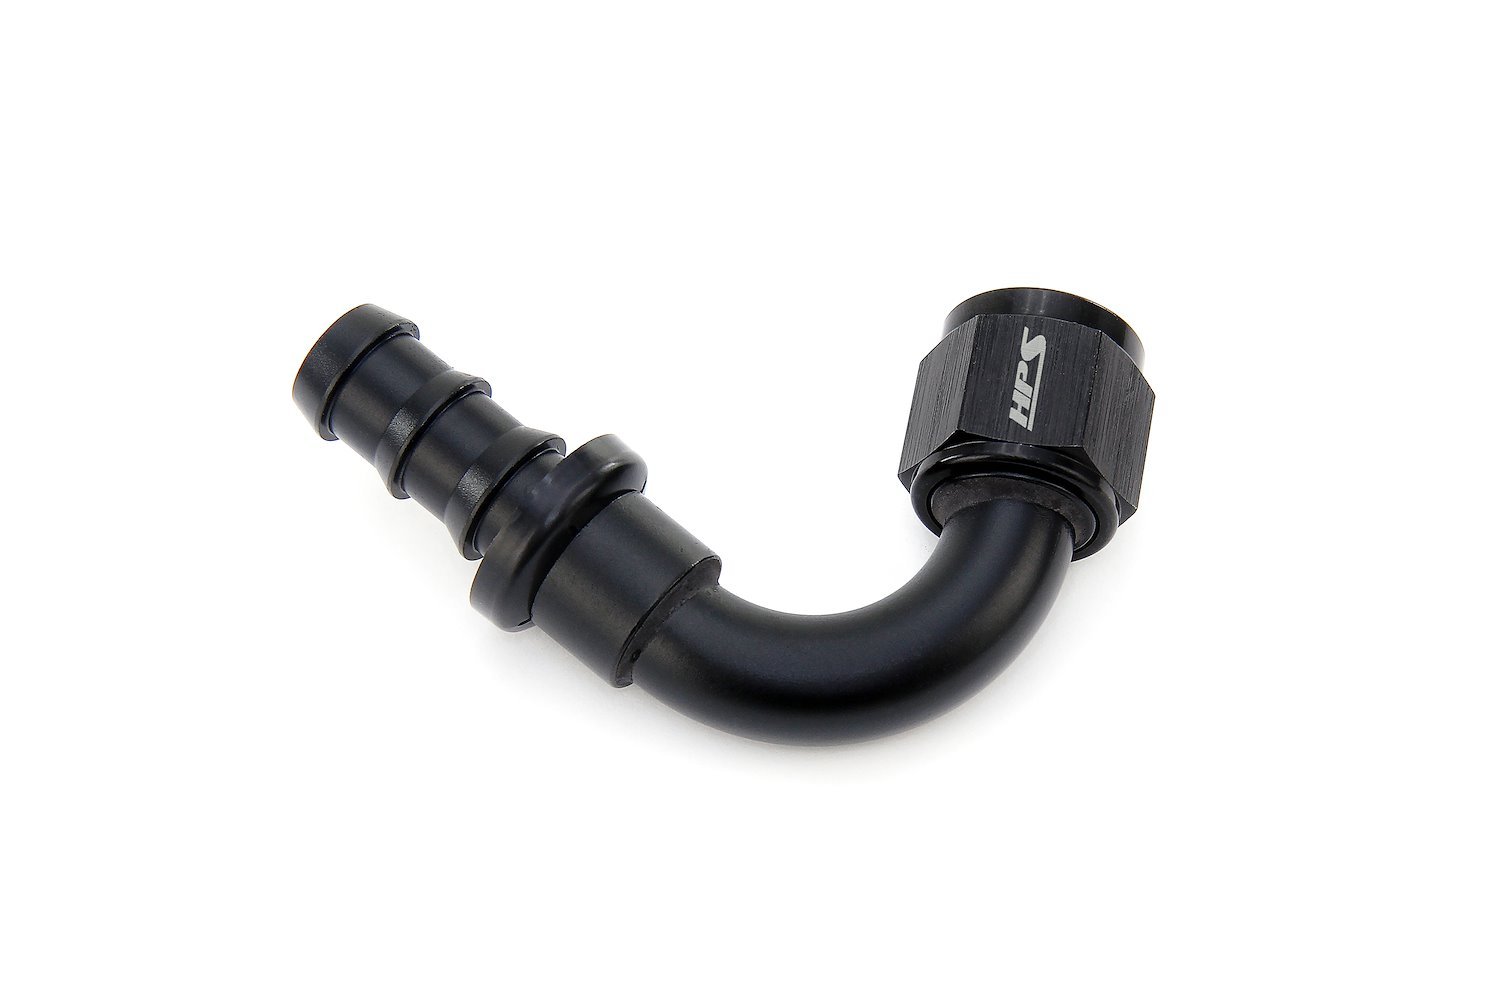 150-1512 150 Series 150-Deg Hose End, Tool-Free Assembly Hose Ends, For Push-On Style Hoses, Easy To Use